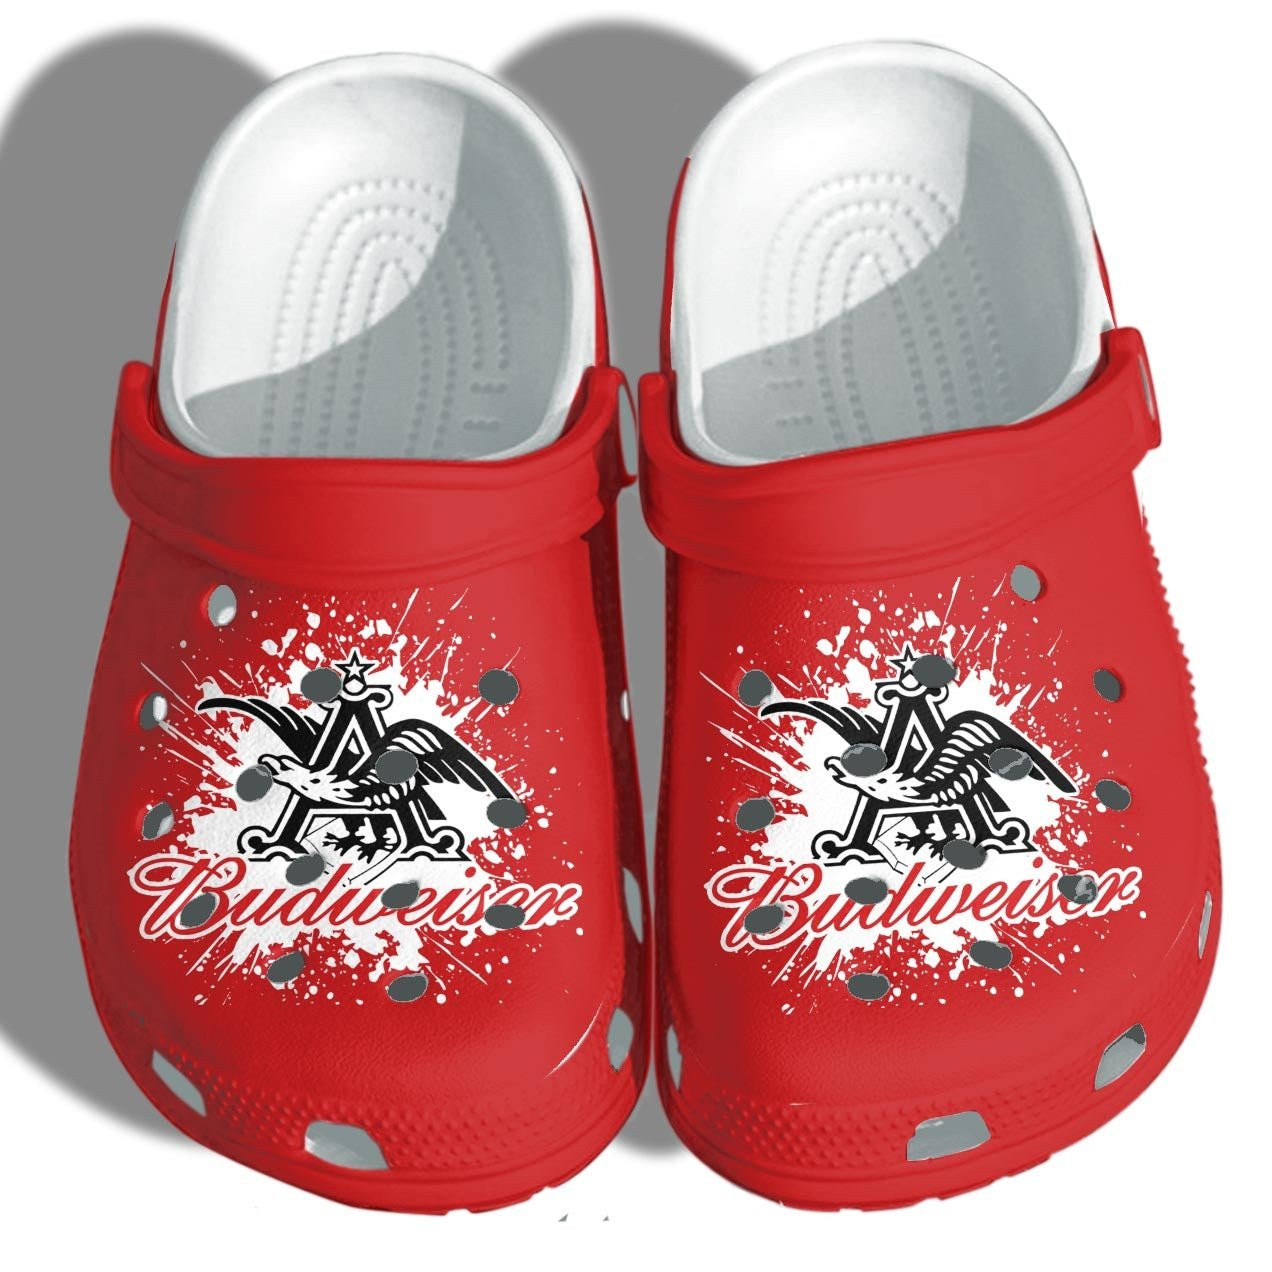 Budweiser Funny Custom Crocs Shoes Clogs For Men Women - Beer Drinkin Outdoor Shoes